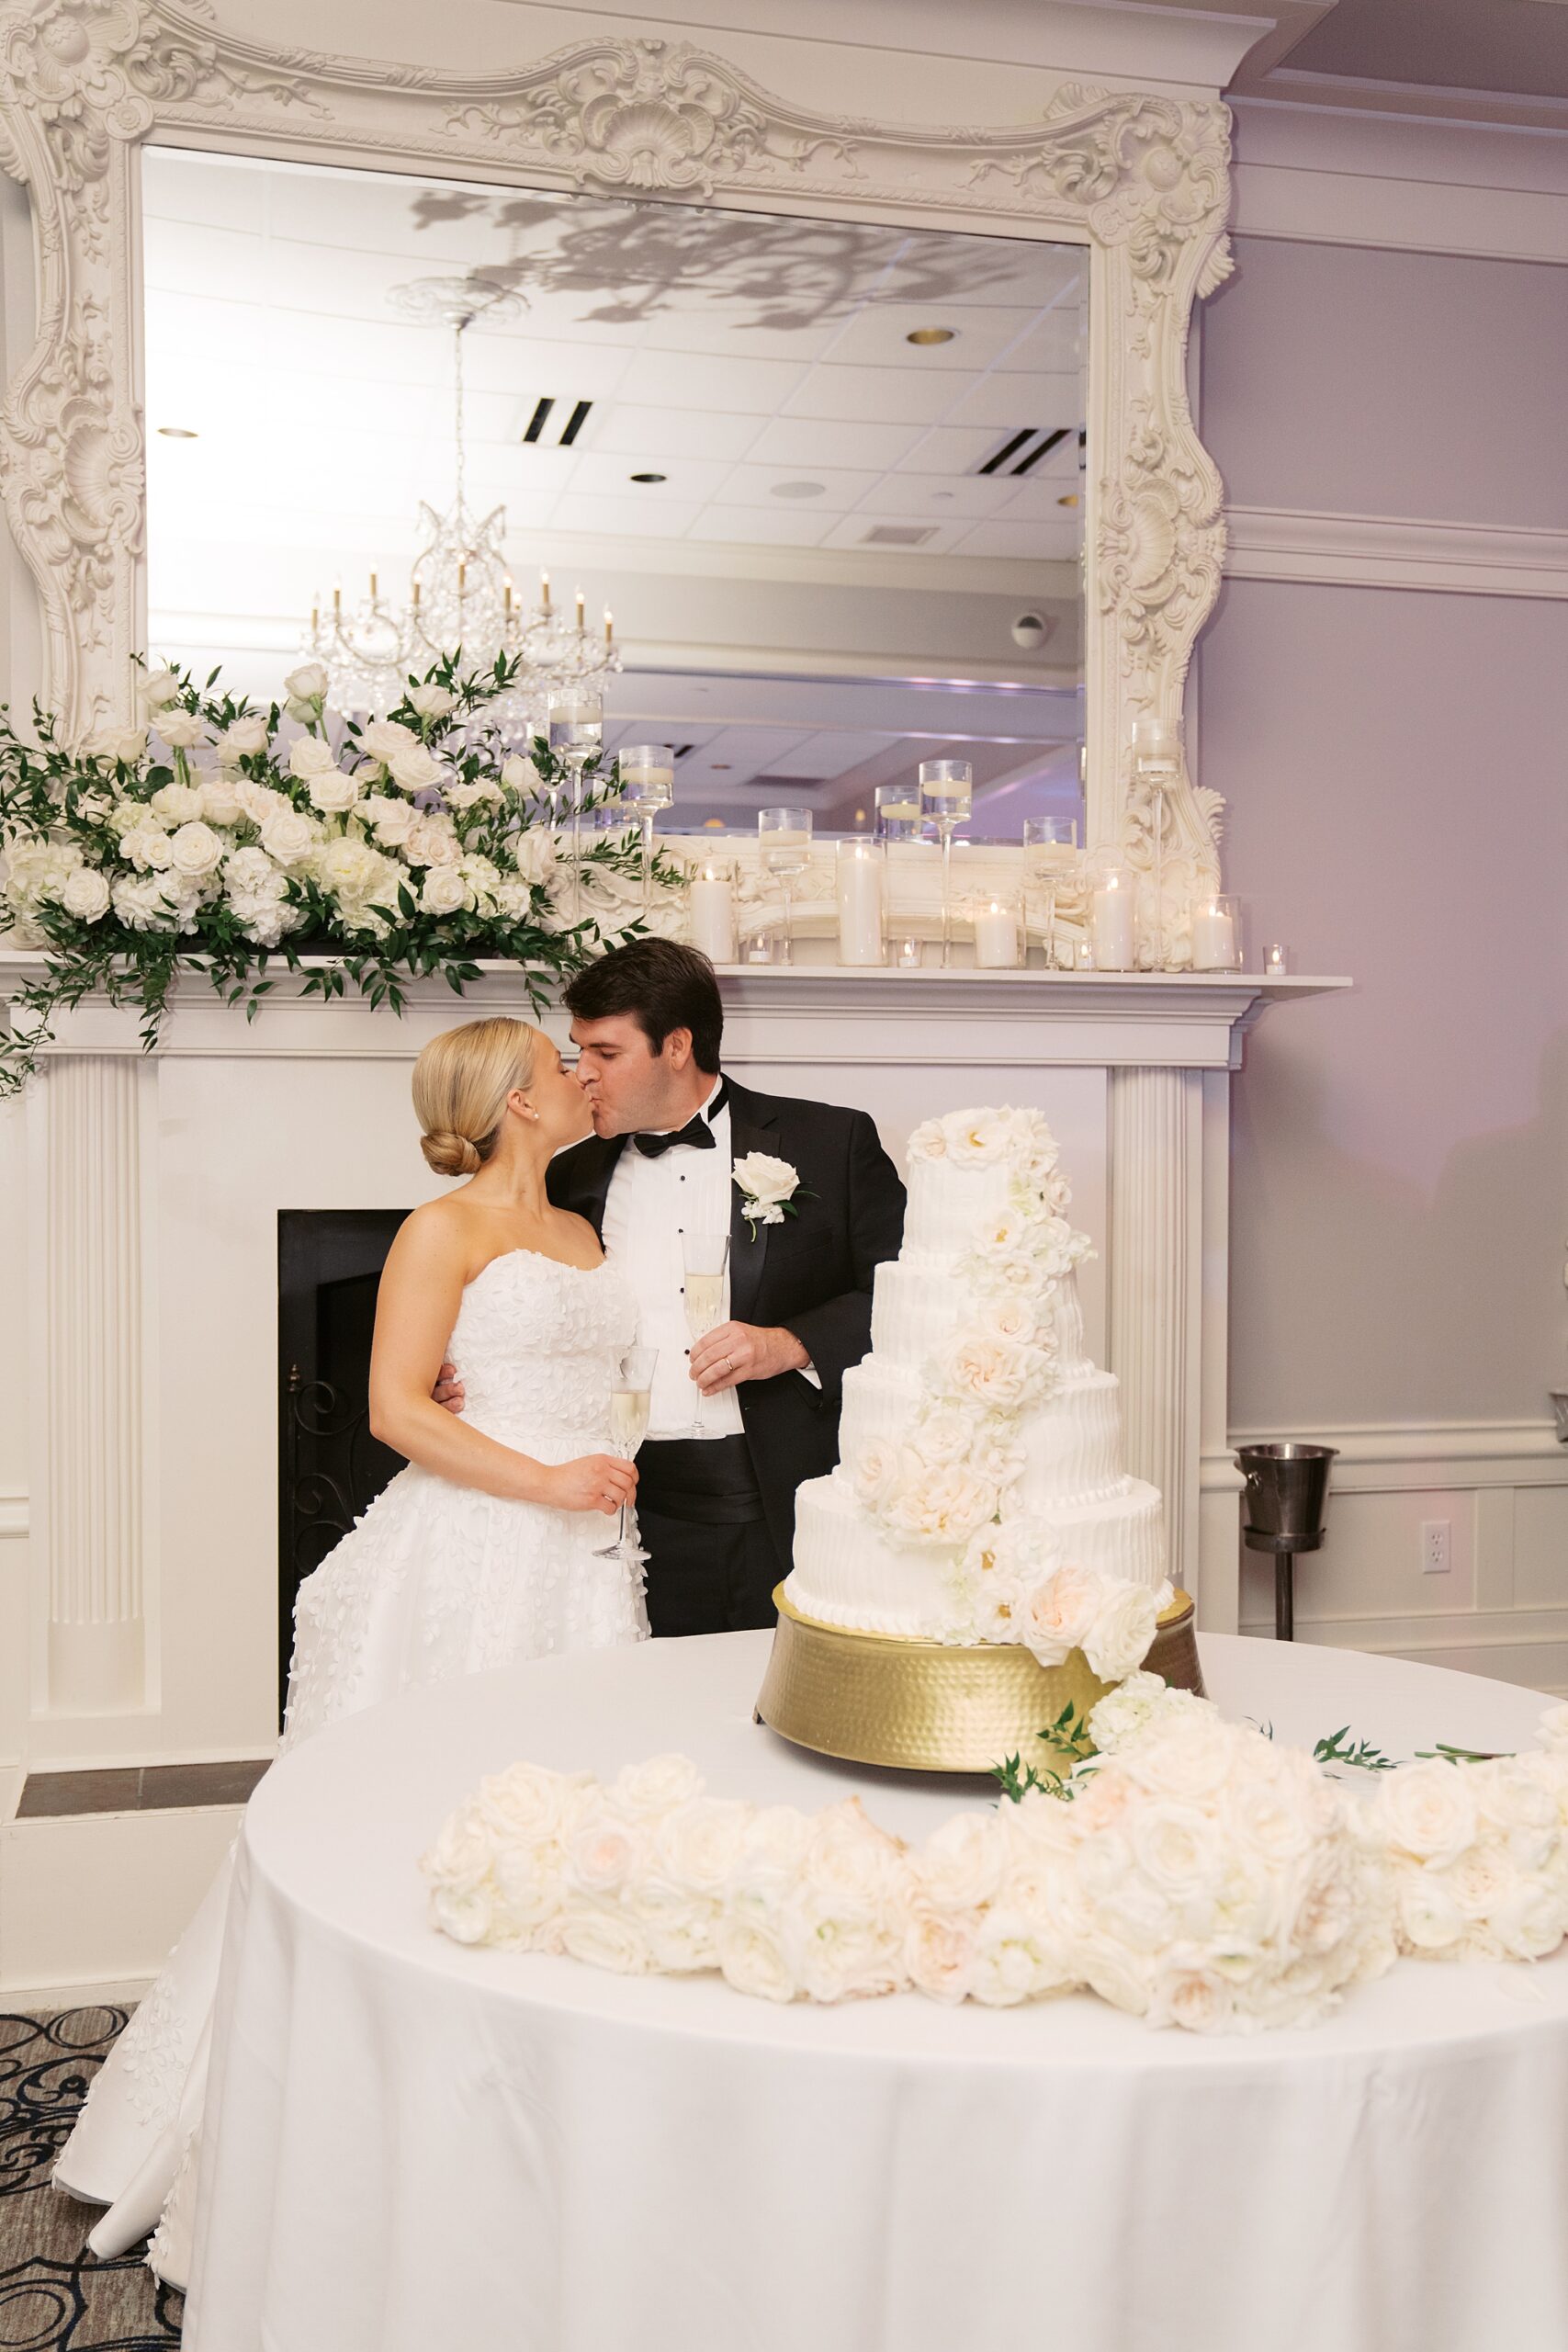 newlyweds kiss while cutting tiered wedding cake during wedding reception in Lafayette LA